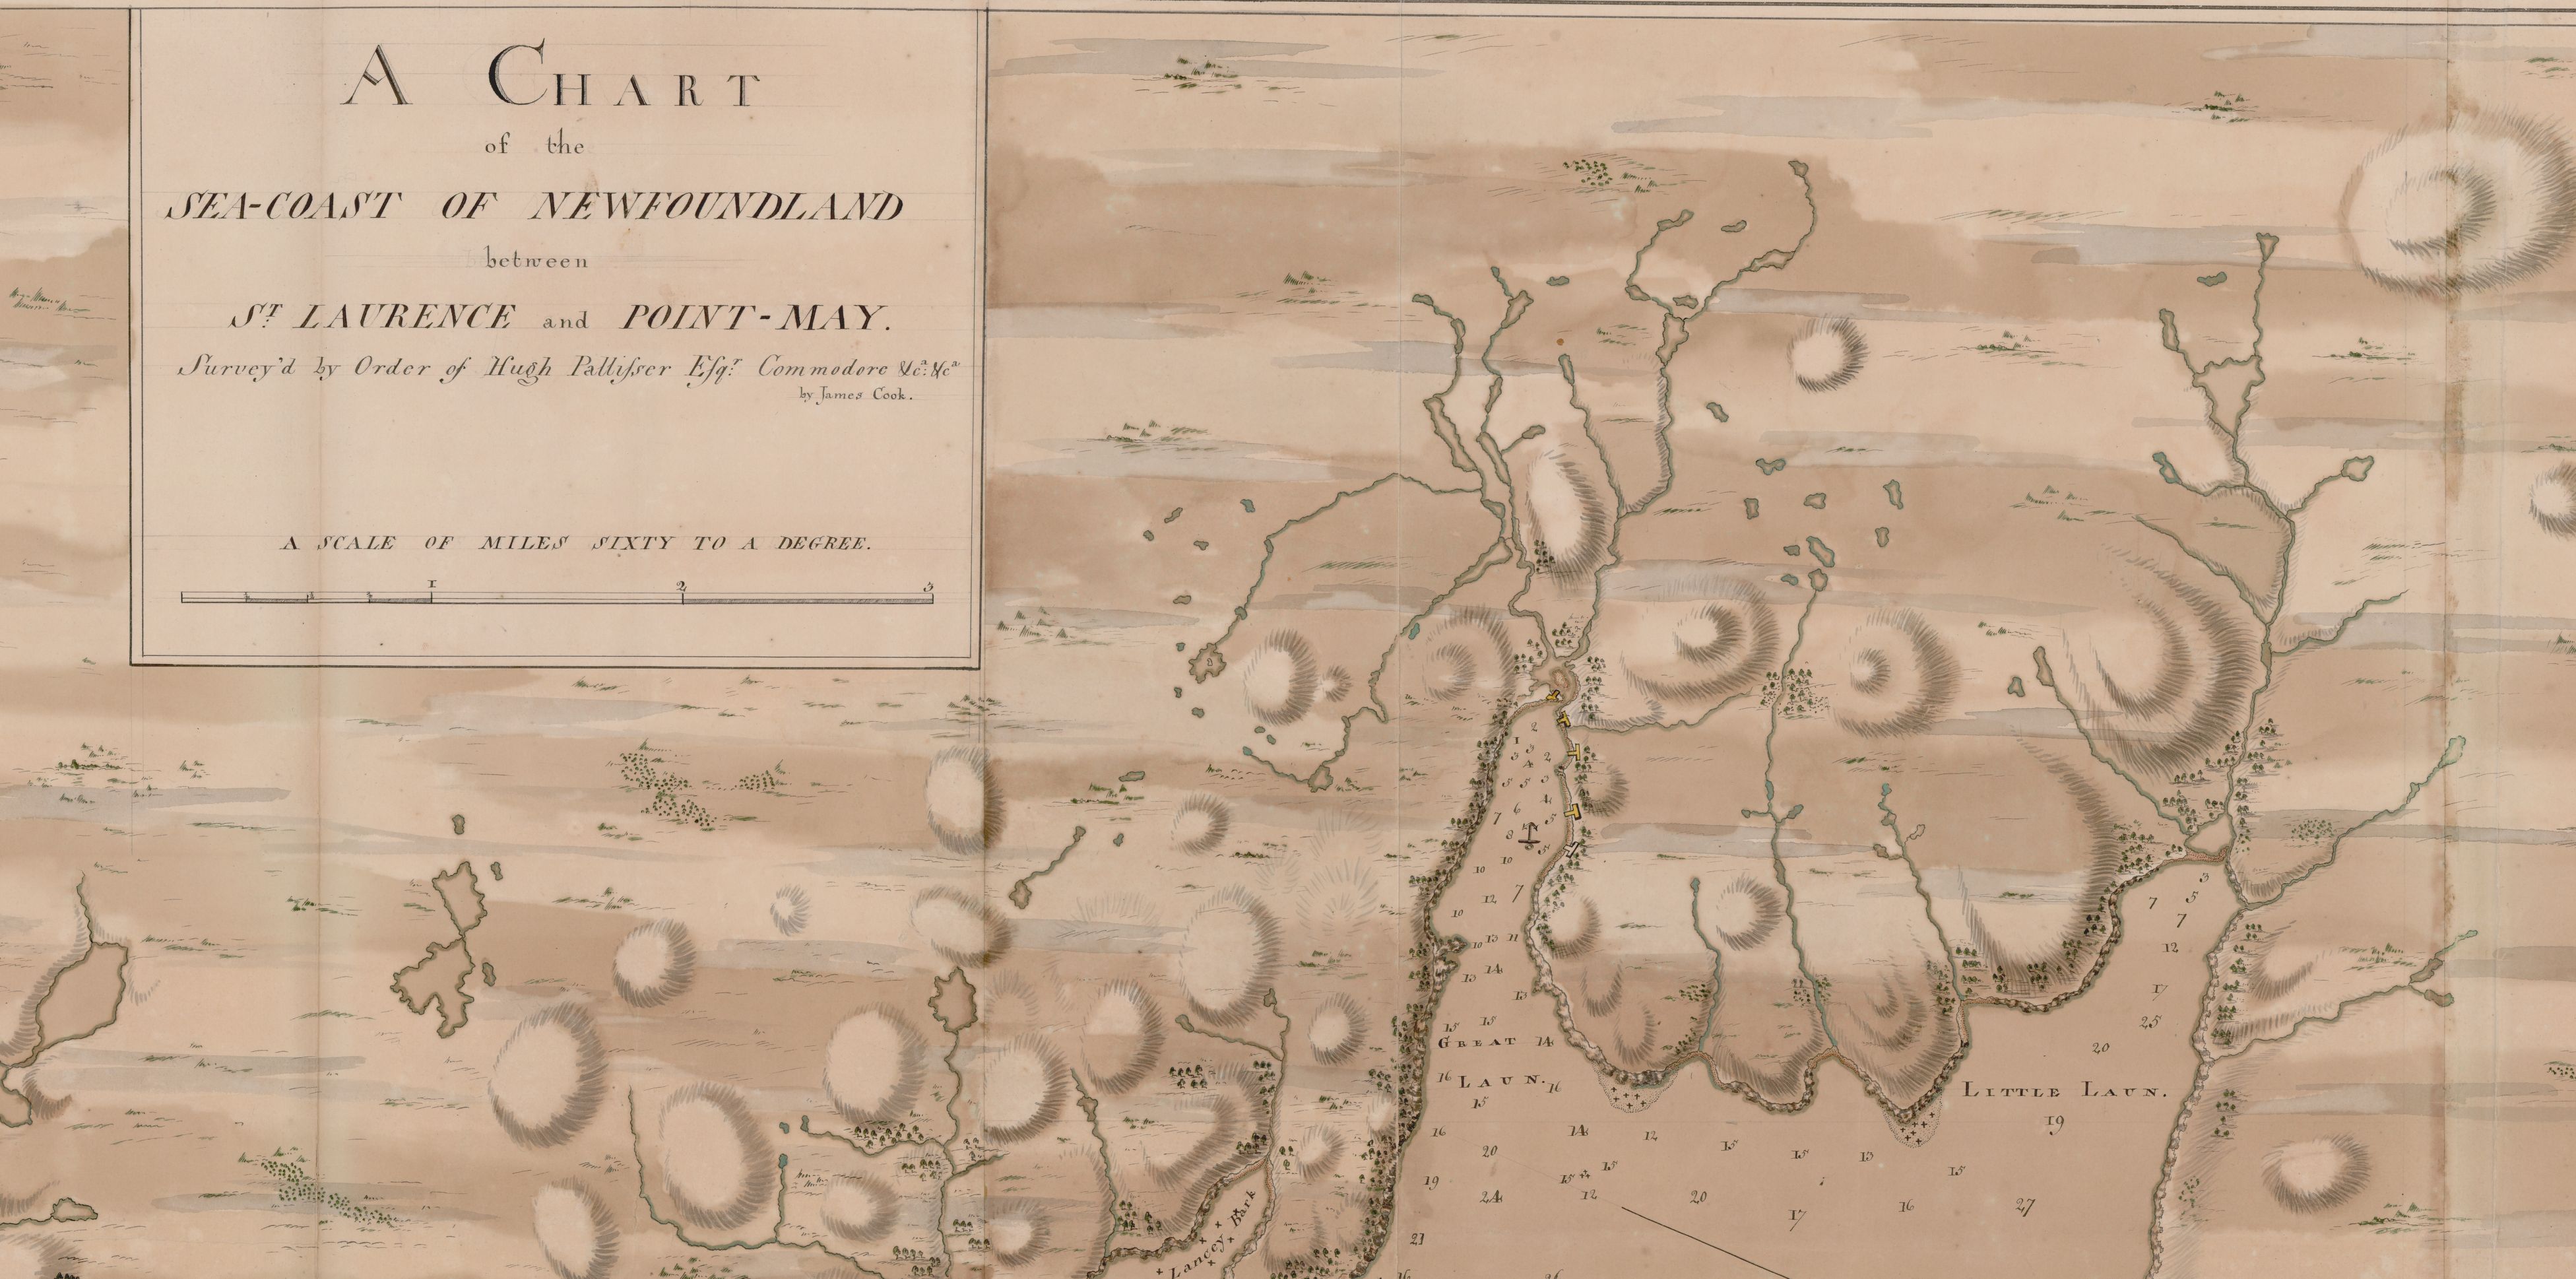 Portion of a manuscript map with a simple box cartouche and part of a coastline with water depth. The land is shaded to show elevation.